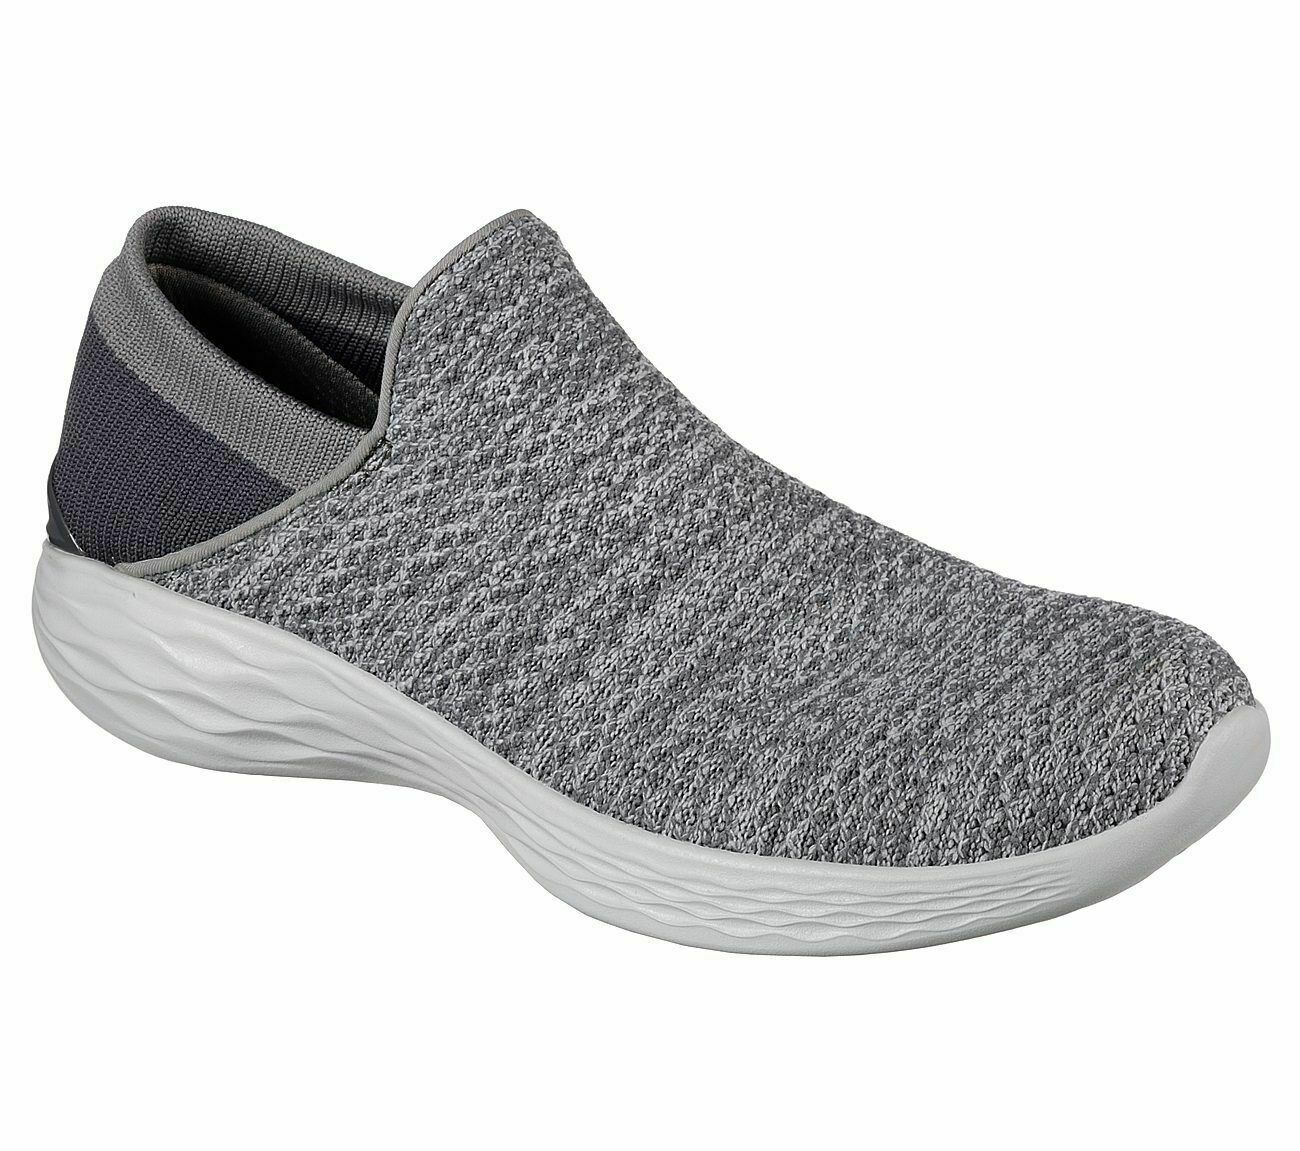 skechers yoga shoes Sale,up to 60 